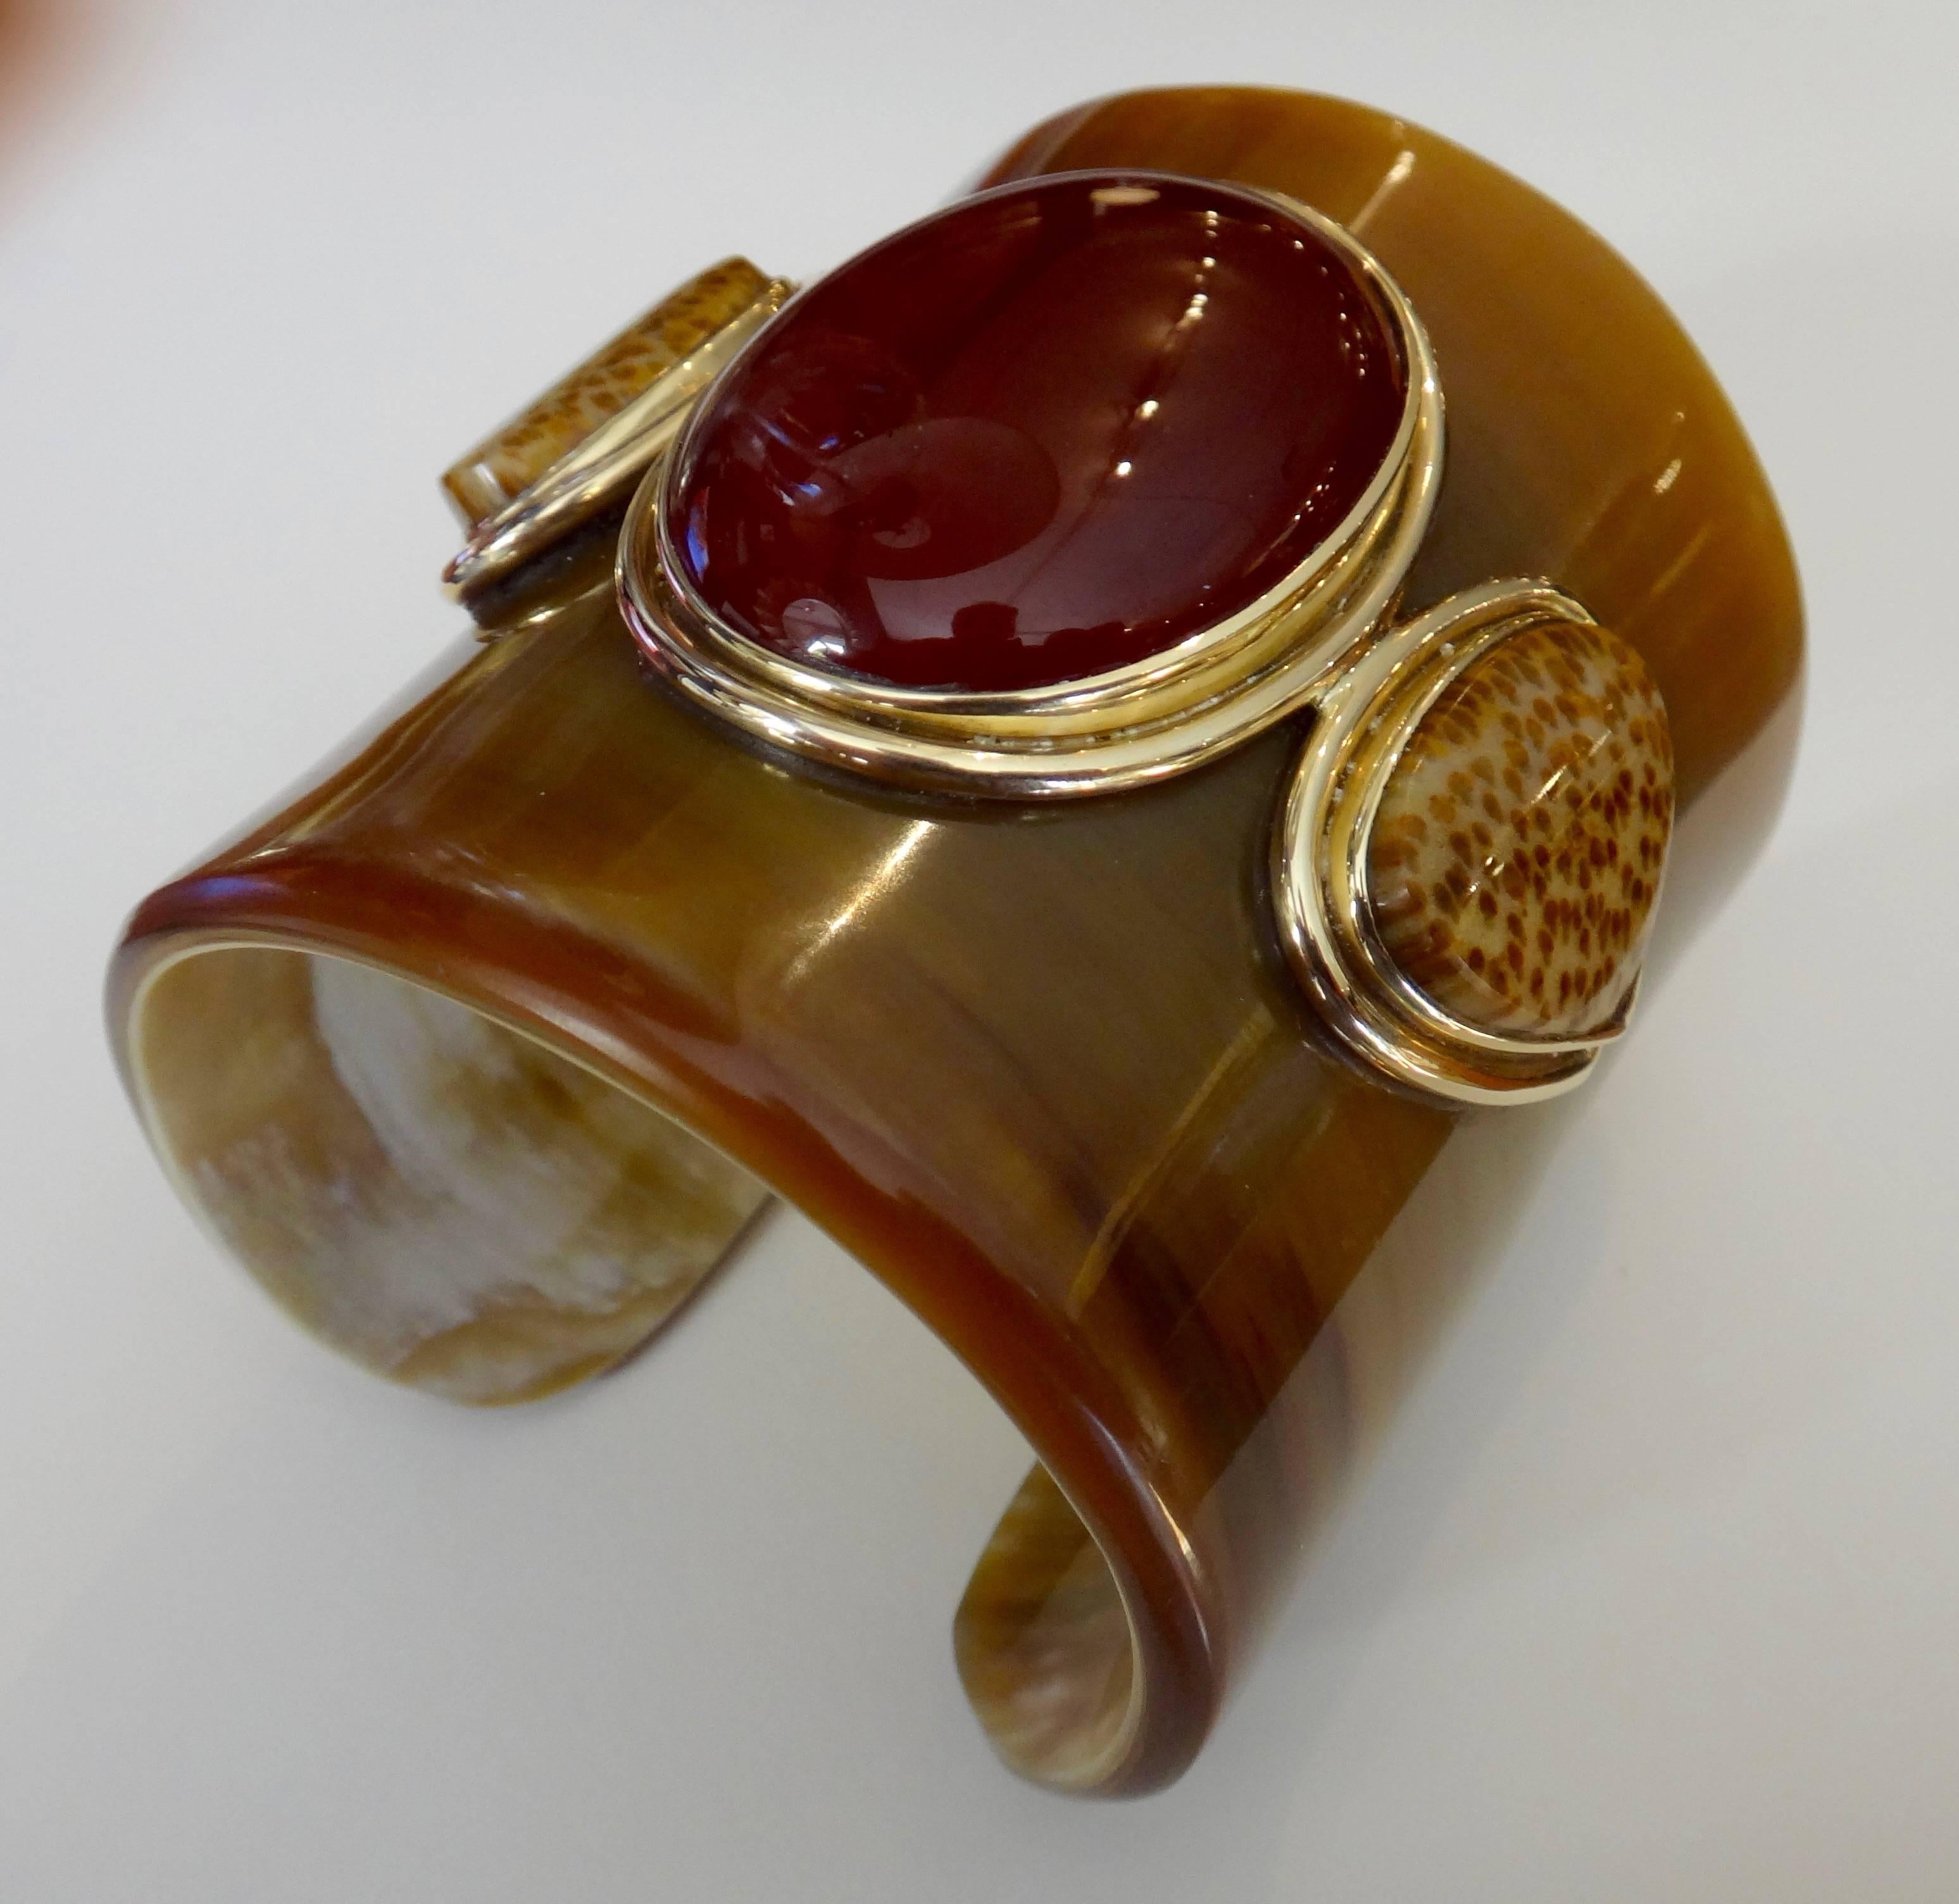 A massive cabochon of carnelian is flanked by a perfectly matched pair of petrified palm wood cabochons in this totally cool cuff bracelet.  The gems are mounted in a hand fabricated 18k yellow gold setting which have been mounted on an Ankole horn